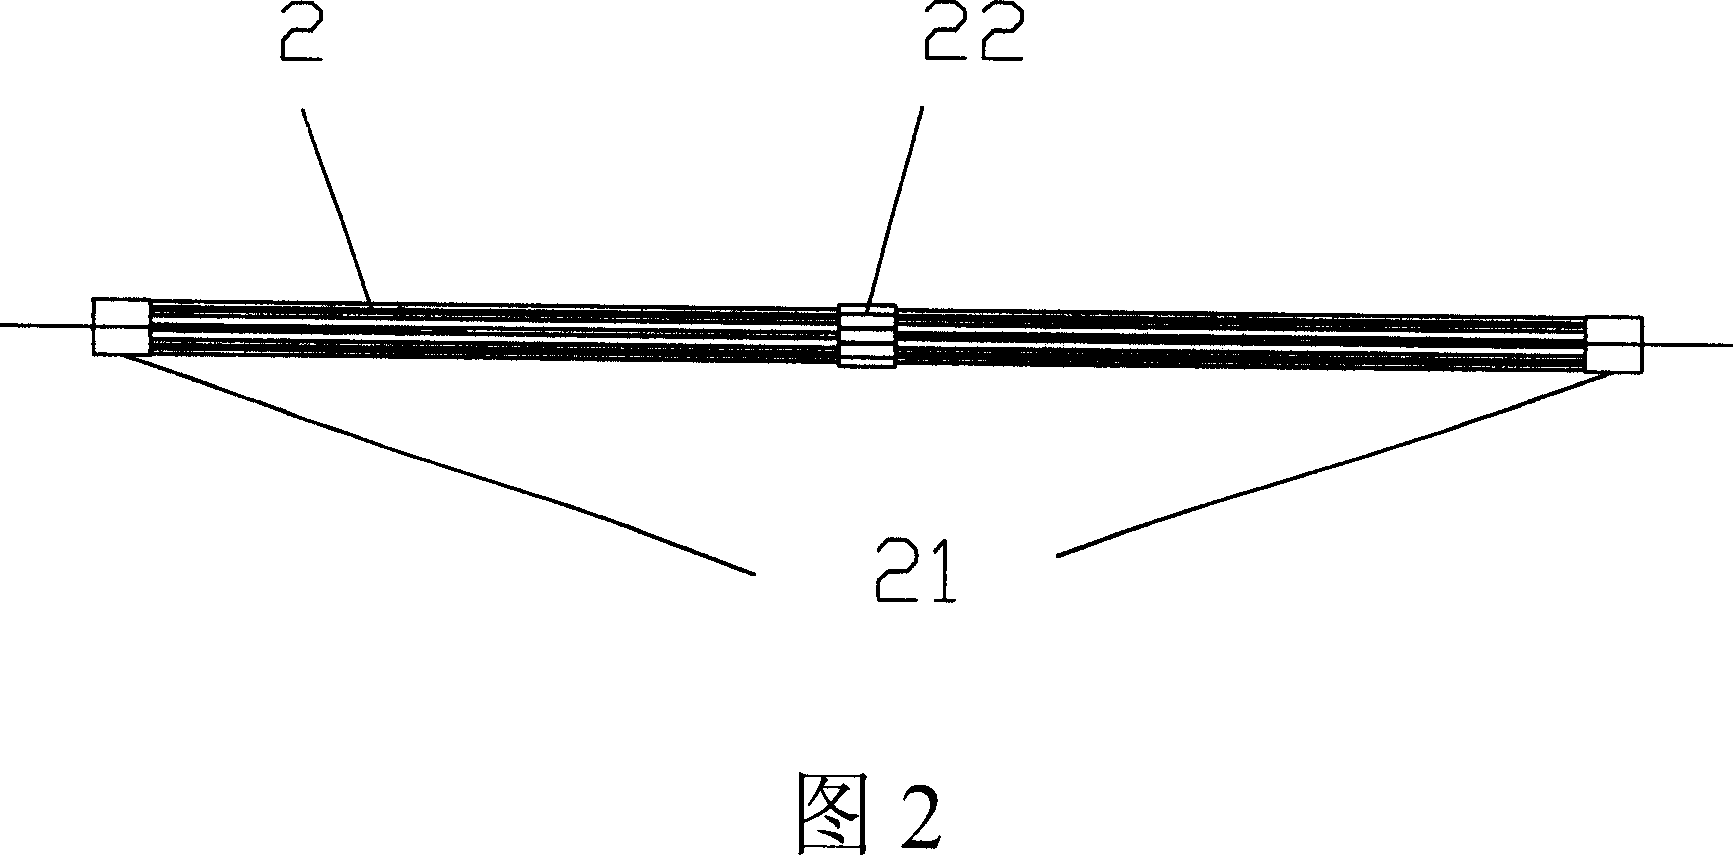 Net-cage electrode catheter